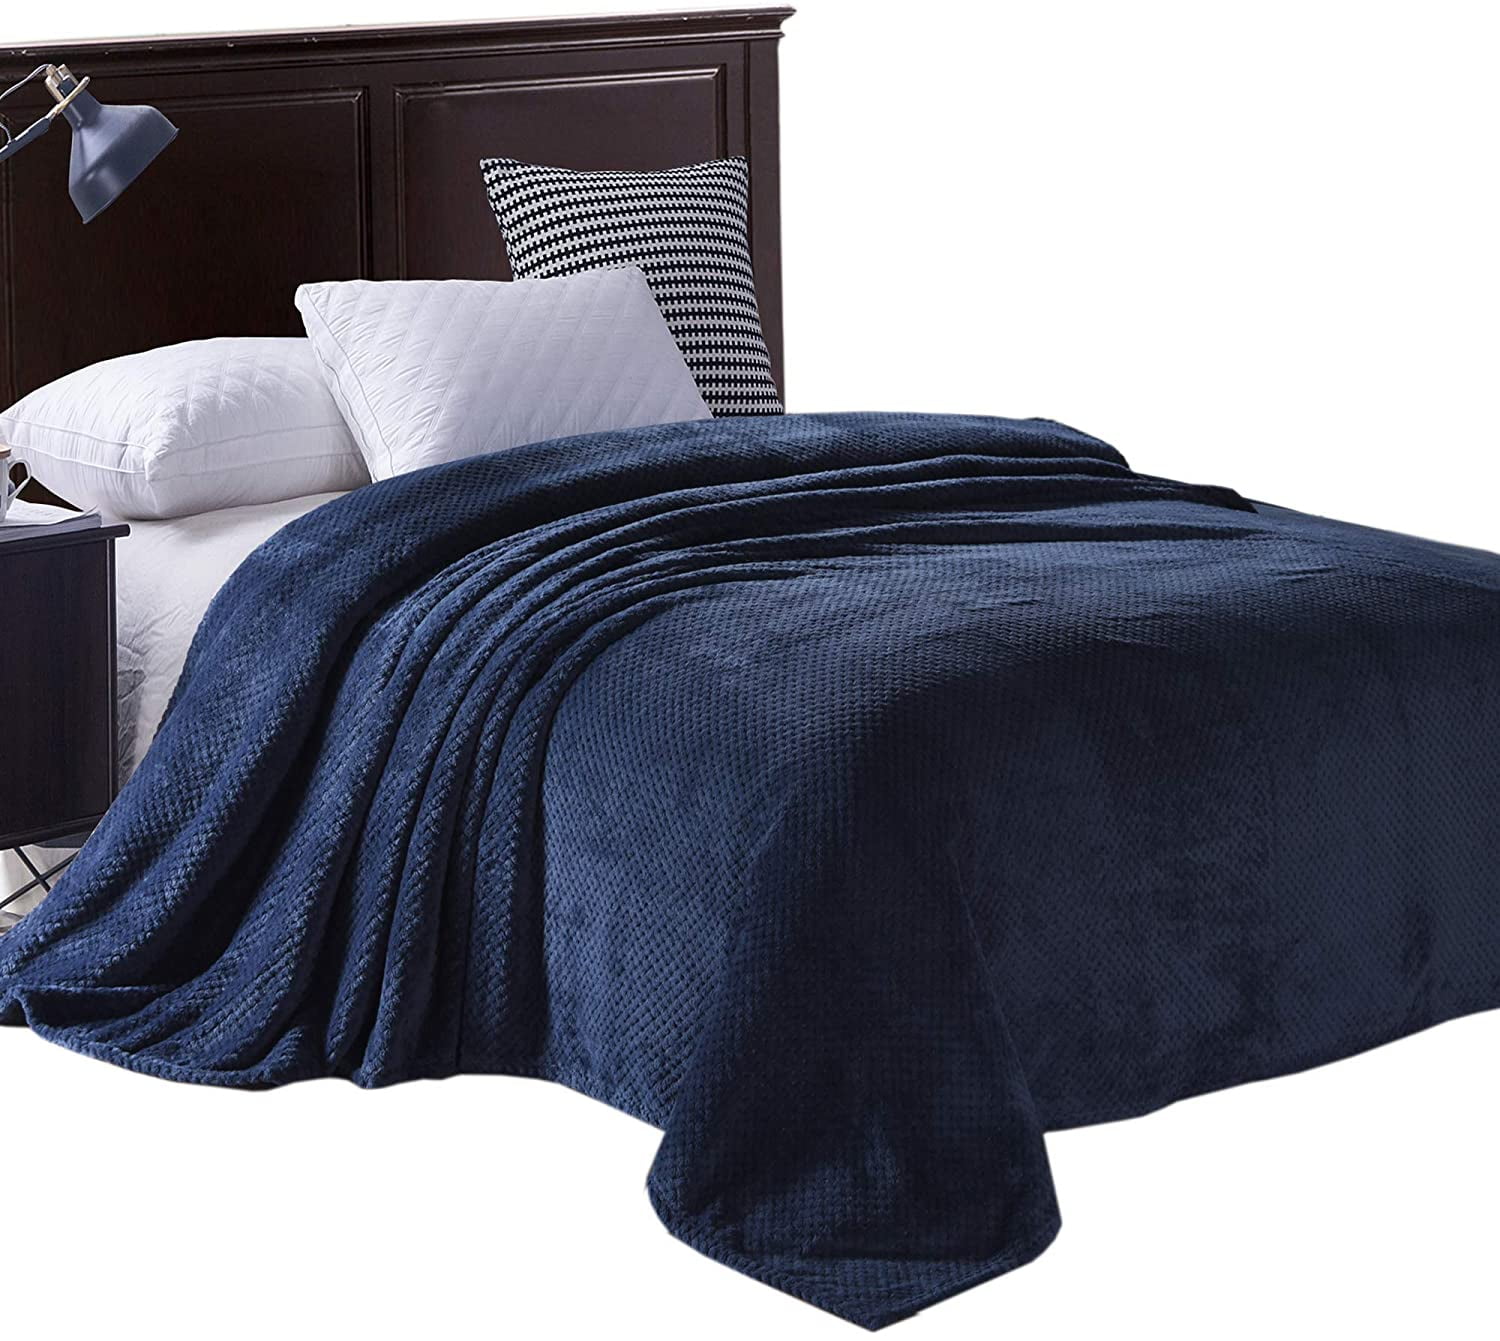 Details about   Electric Heated Throw Navy Over Under Blanket Fleece Bed Washable Soft Mattress 